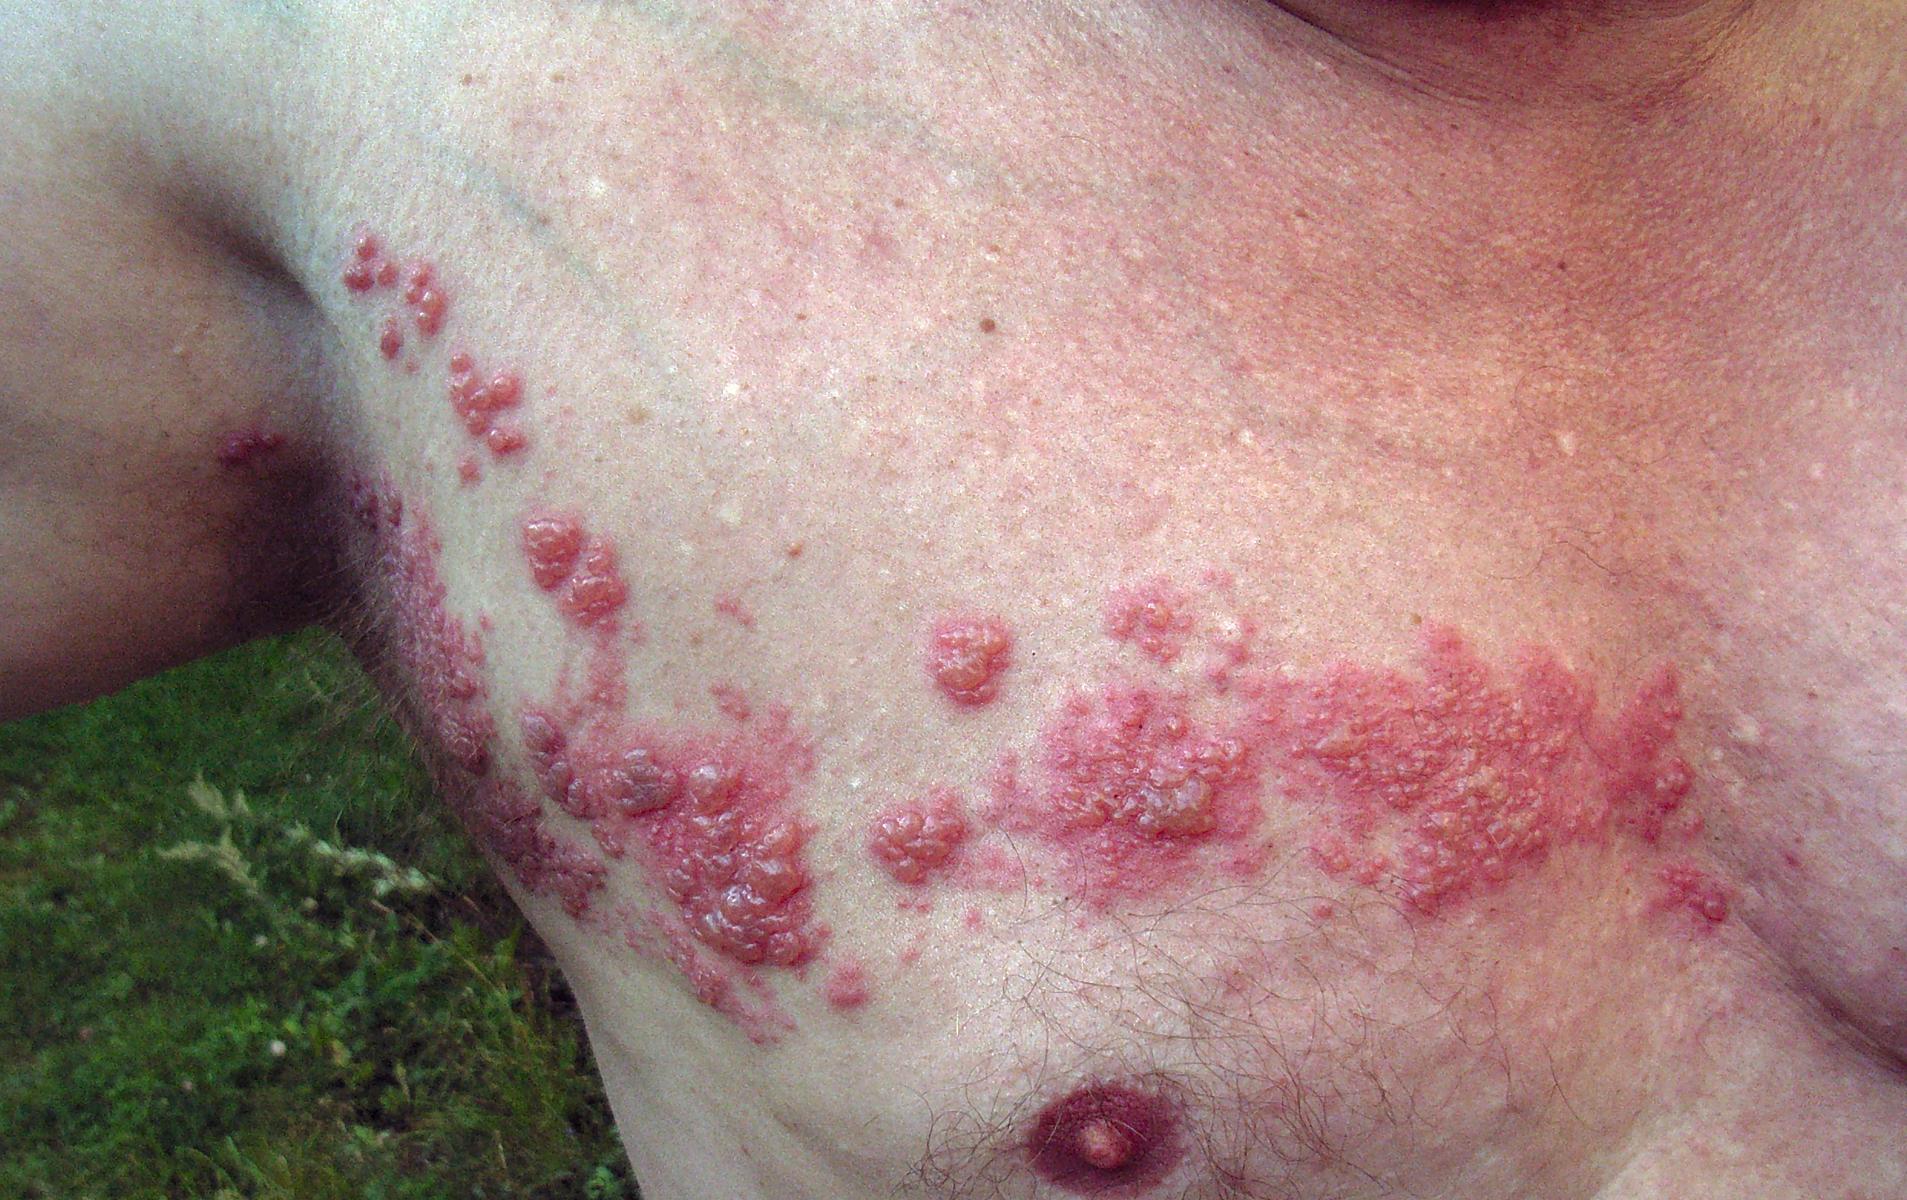 Herpes zoster on the chest